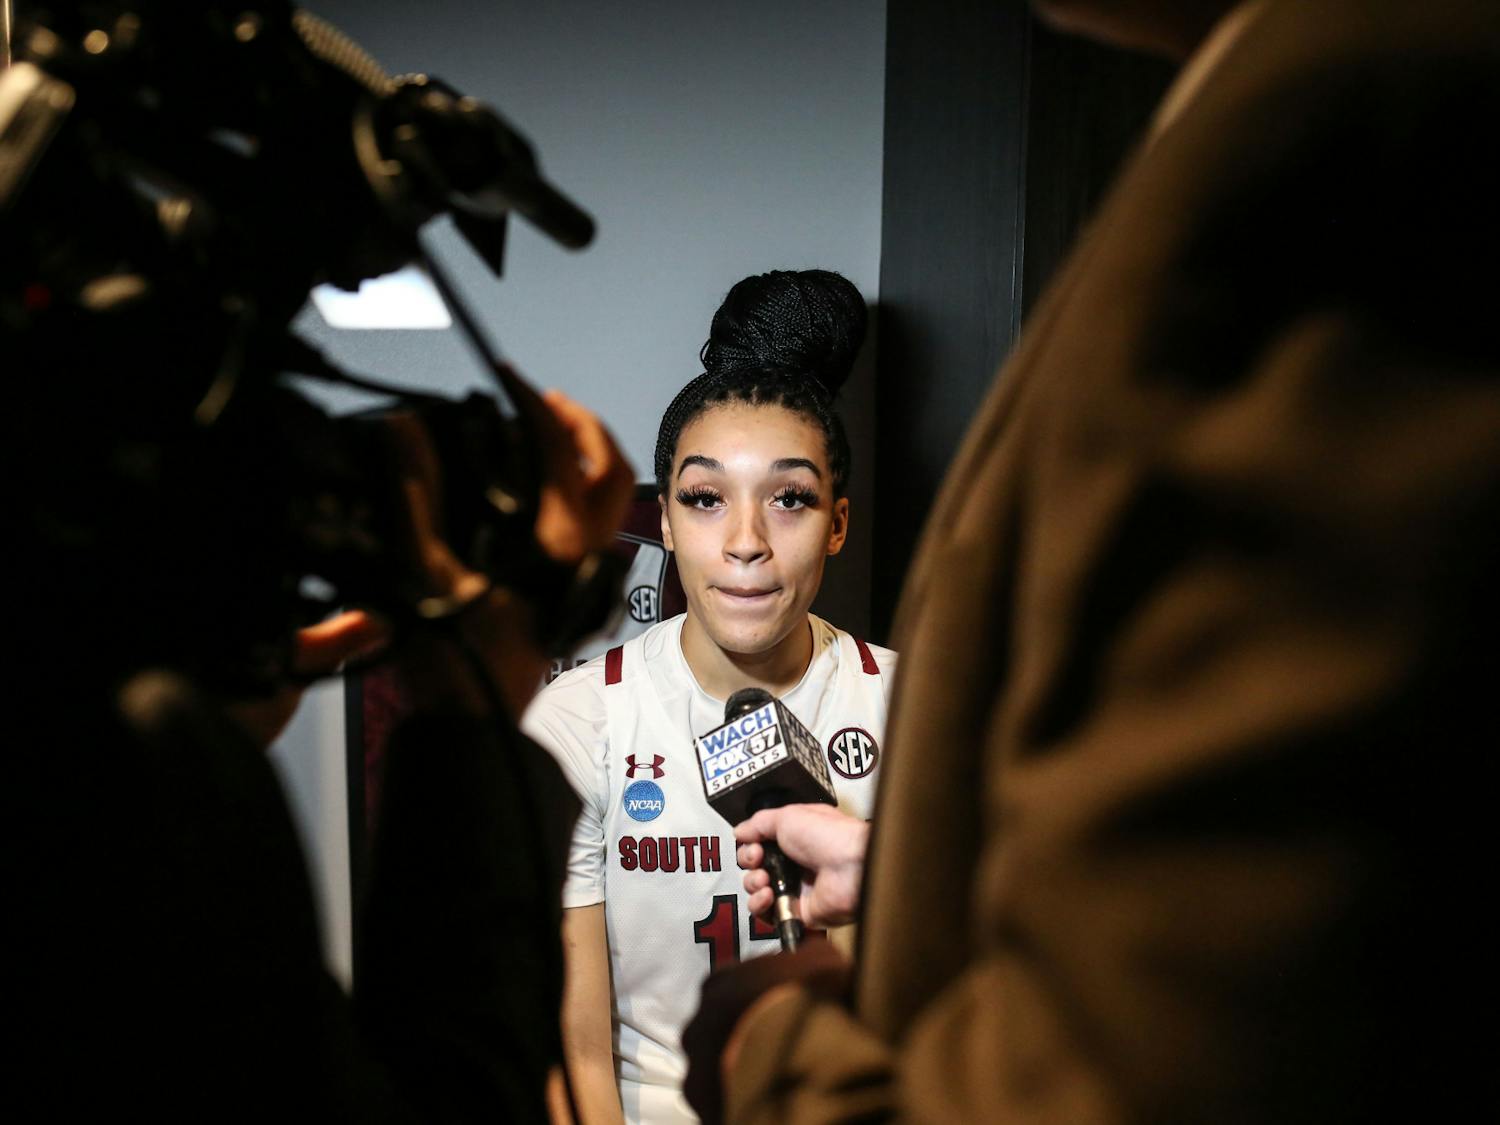 Senior guard Brea Beal is interviewed by WACH Fox 57 in the locker room following South Carolina’s win against South Florida in round two of the NCAA tournament at Colonial Life Arena on March 19, 2023. The Gamecocks defeated the Bulls 76-45.